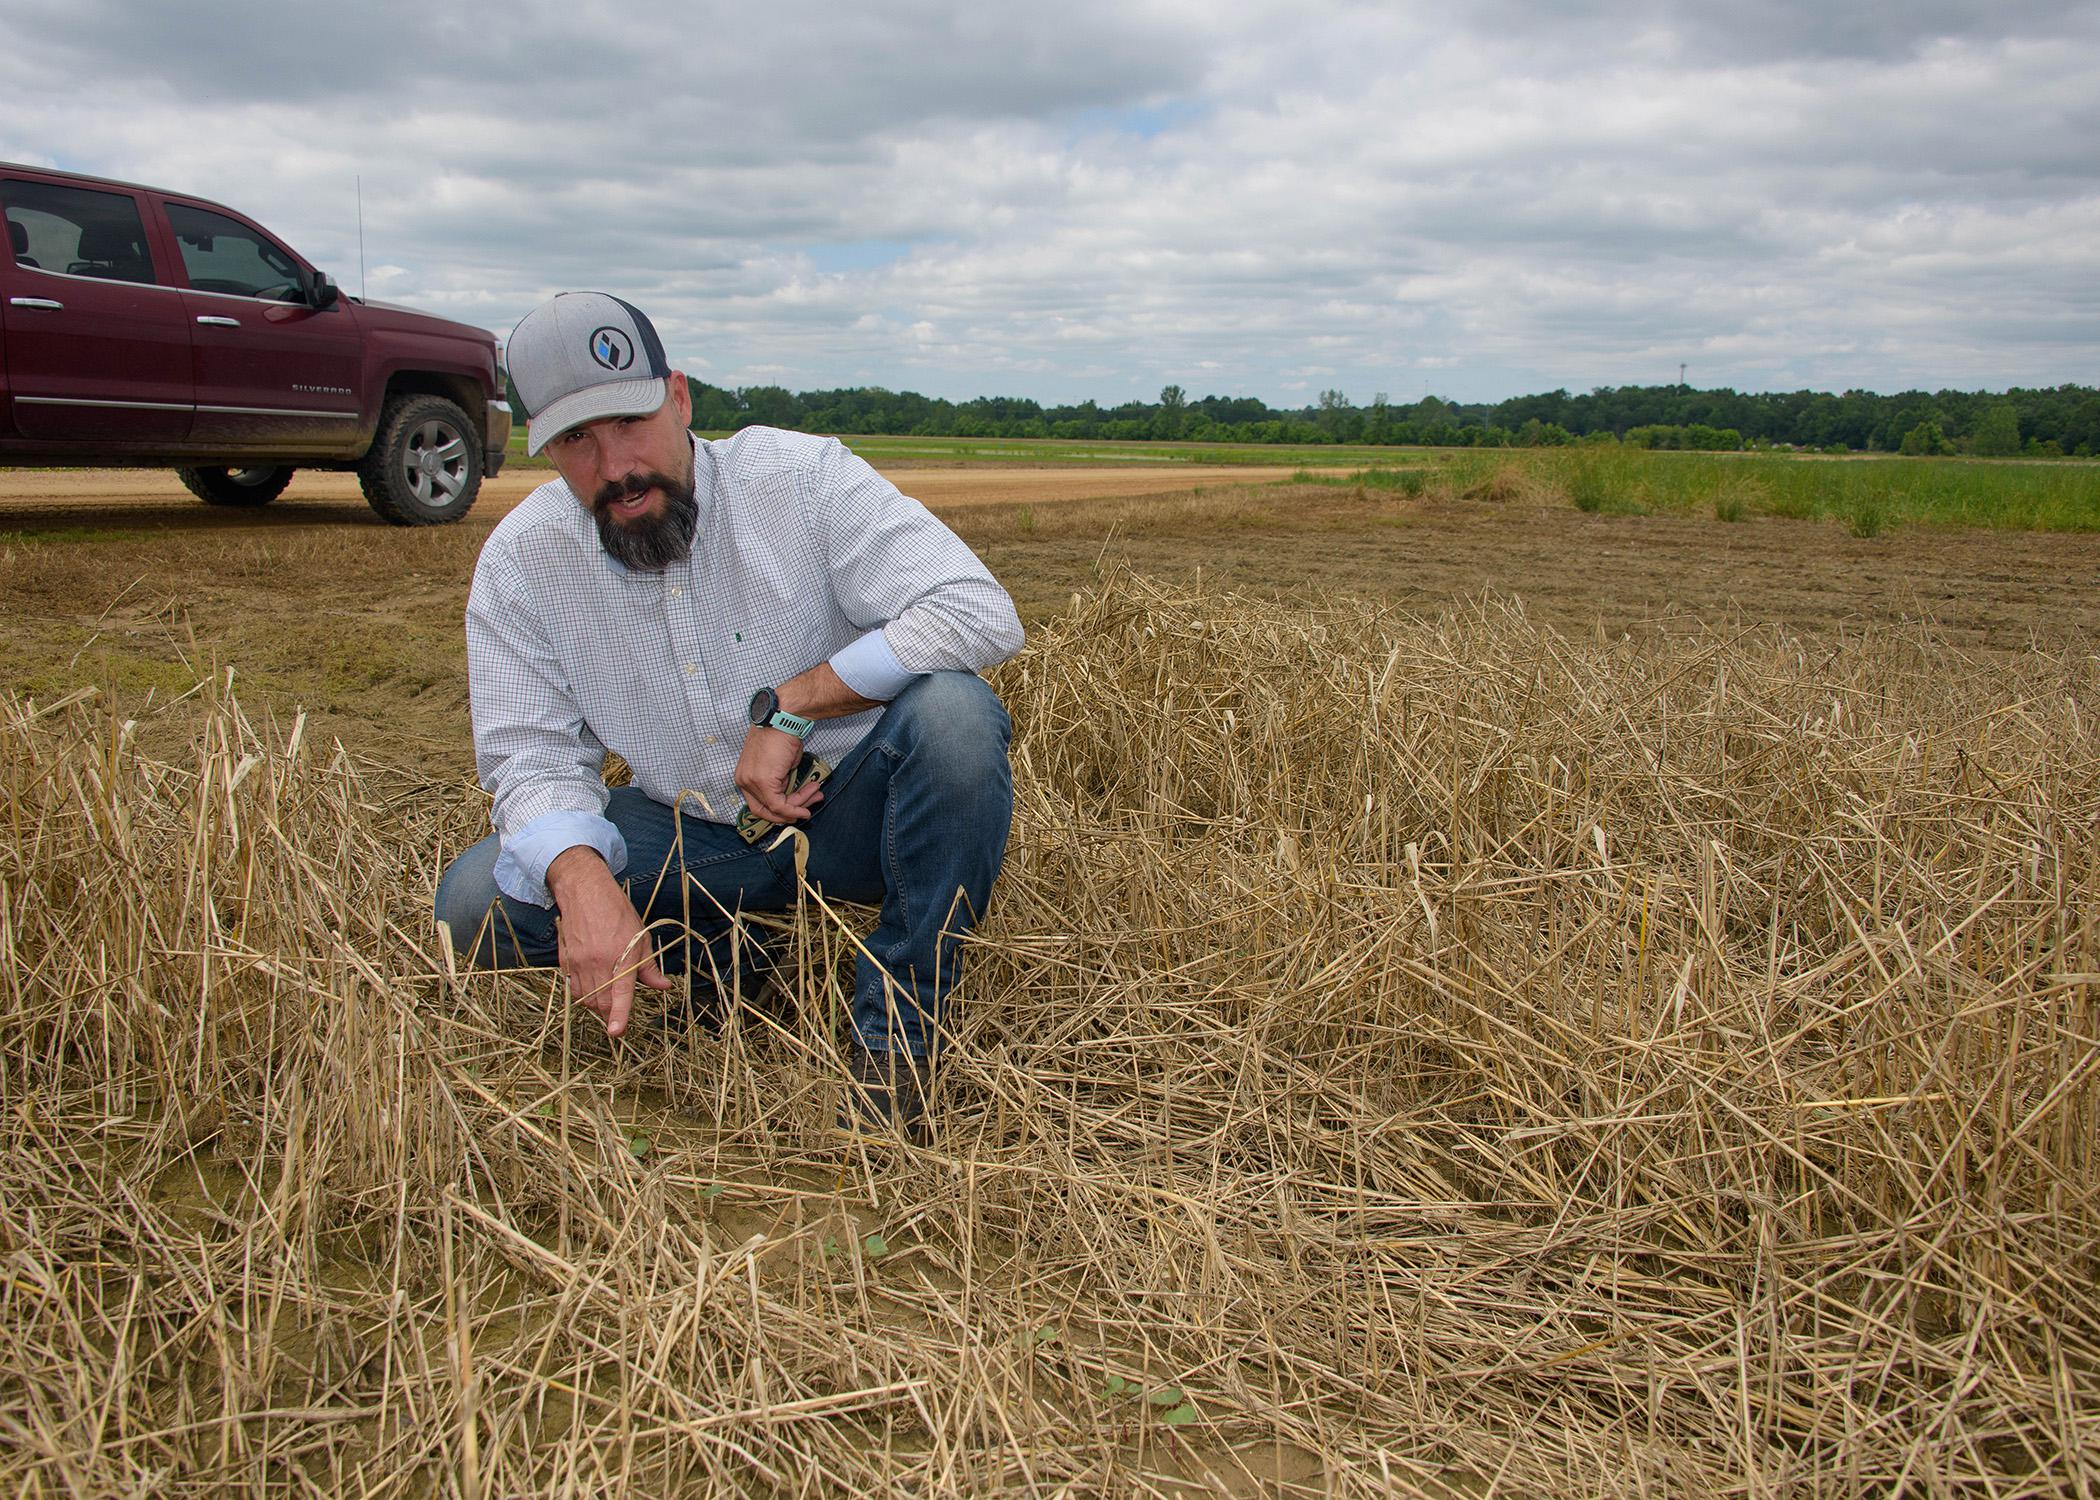  A man in a hat kneels among straw to point at tiny plants.